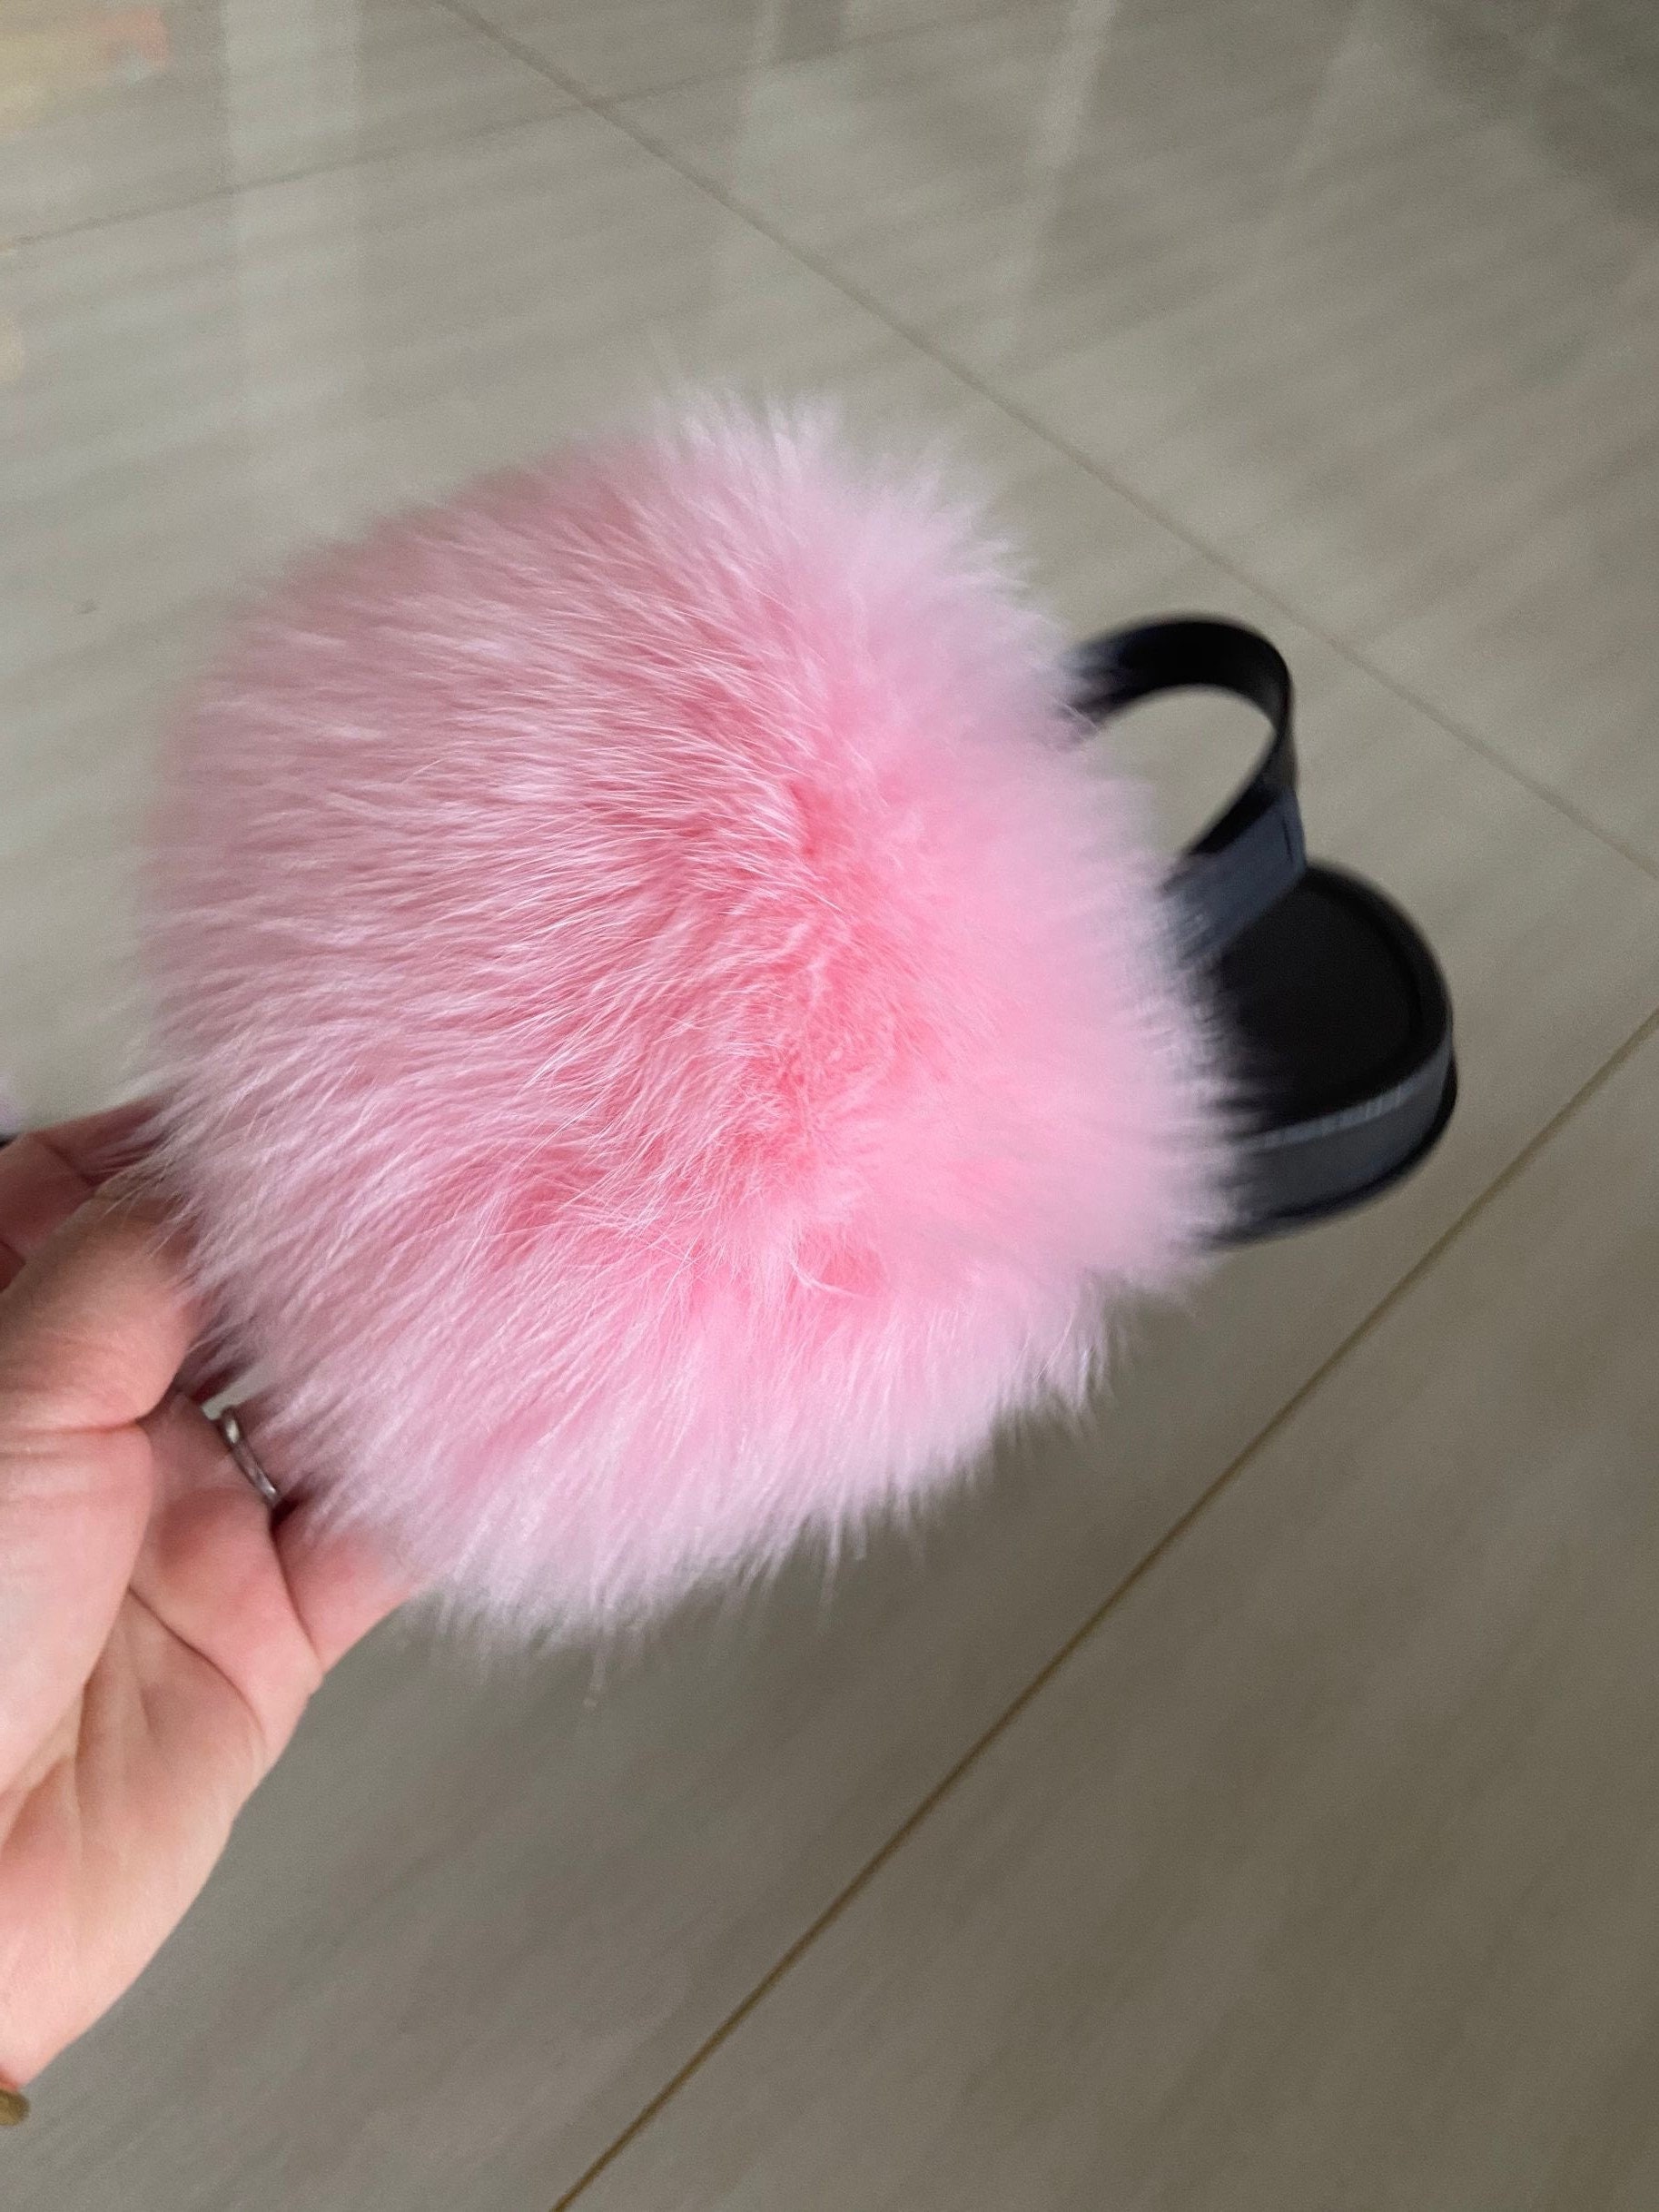 Tradecan Women's Furry Slides Faux Fur Slides Fuzzy Slippers Fluffy Sandals Outdoor Indoor, Size: 37, Pink